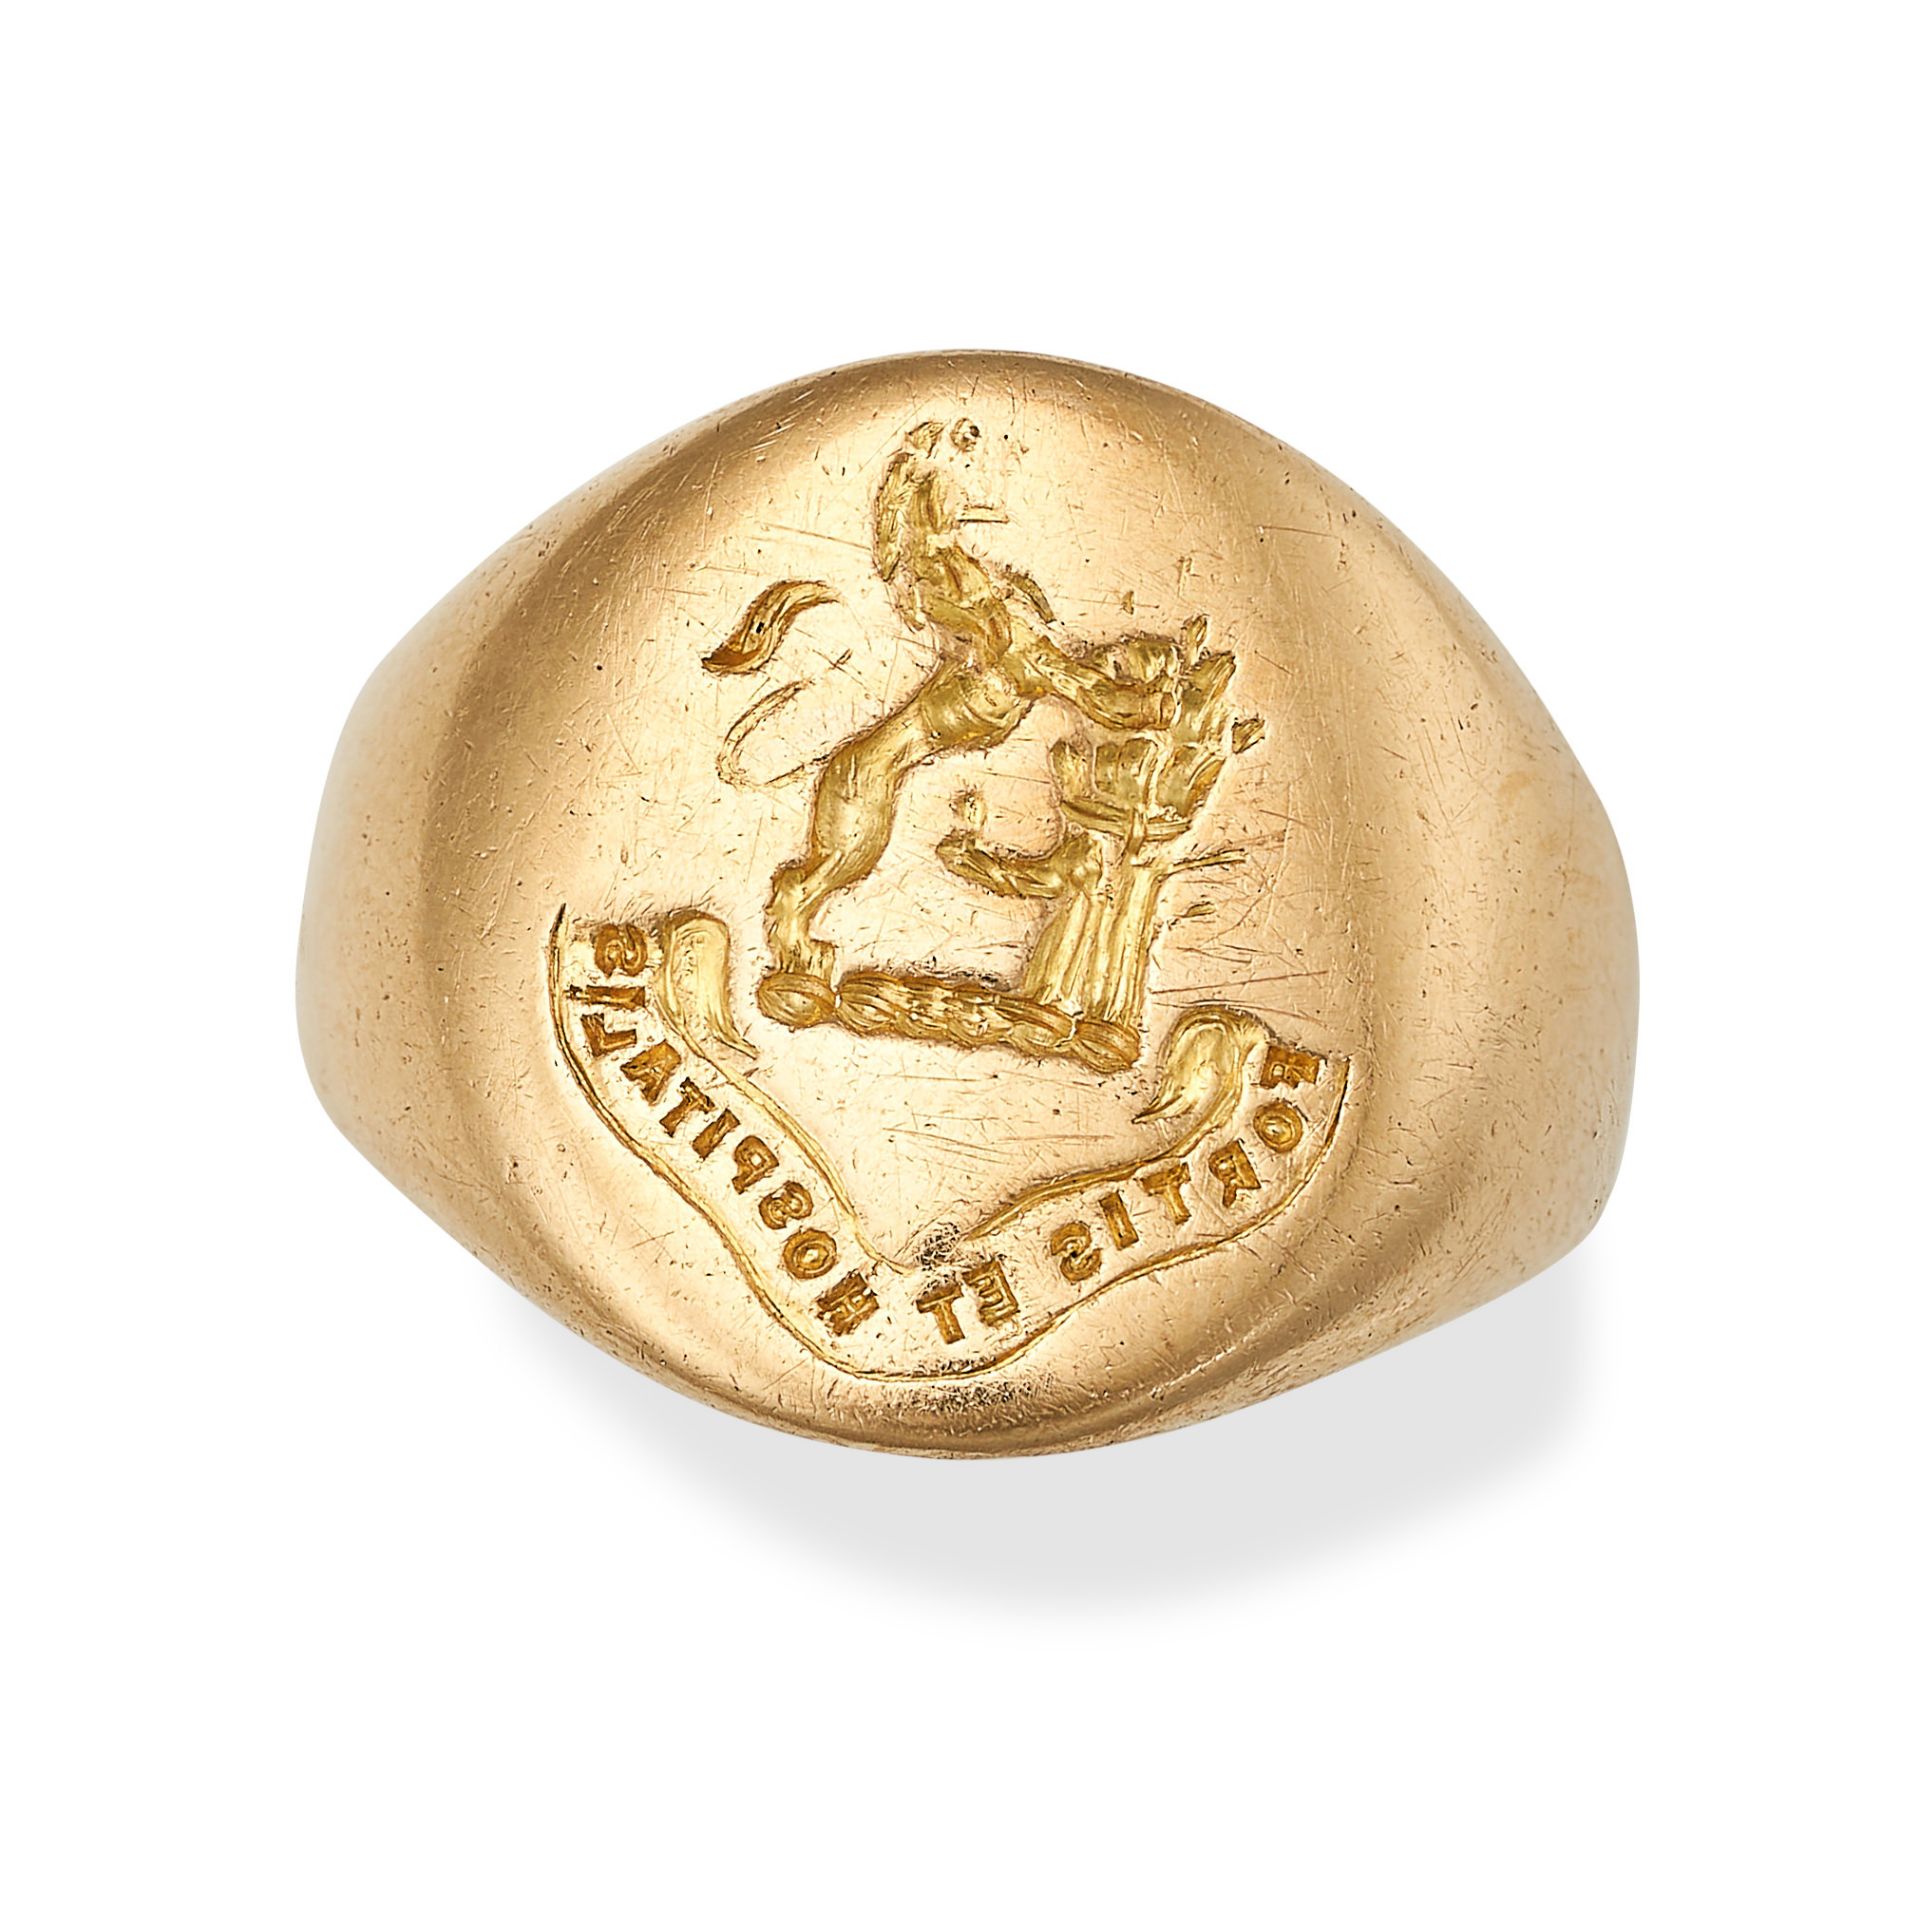 A VINTAGE GOLD SIGNET RING in 18ct yellow gold, the oval face with an engraved coat of arms and